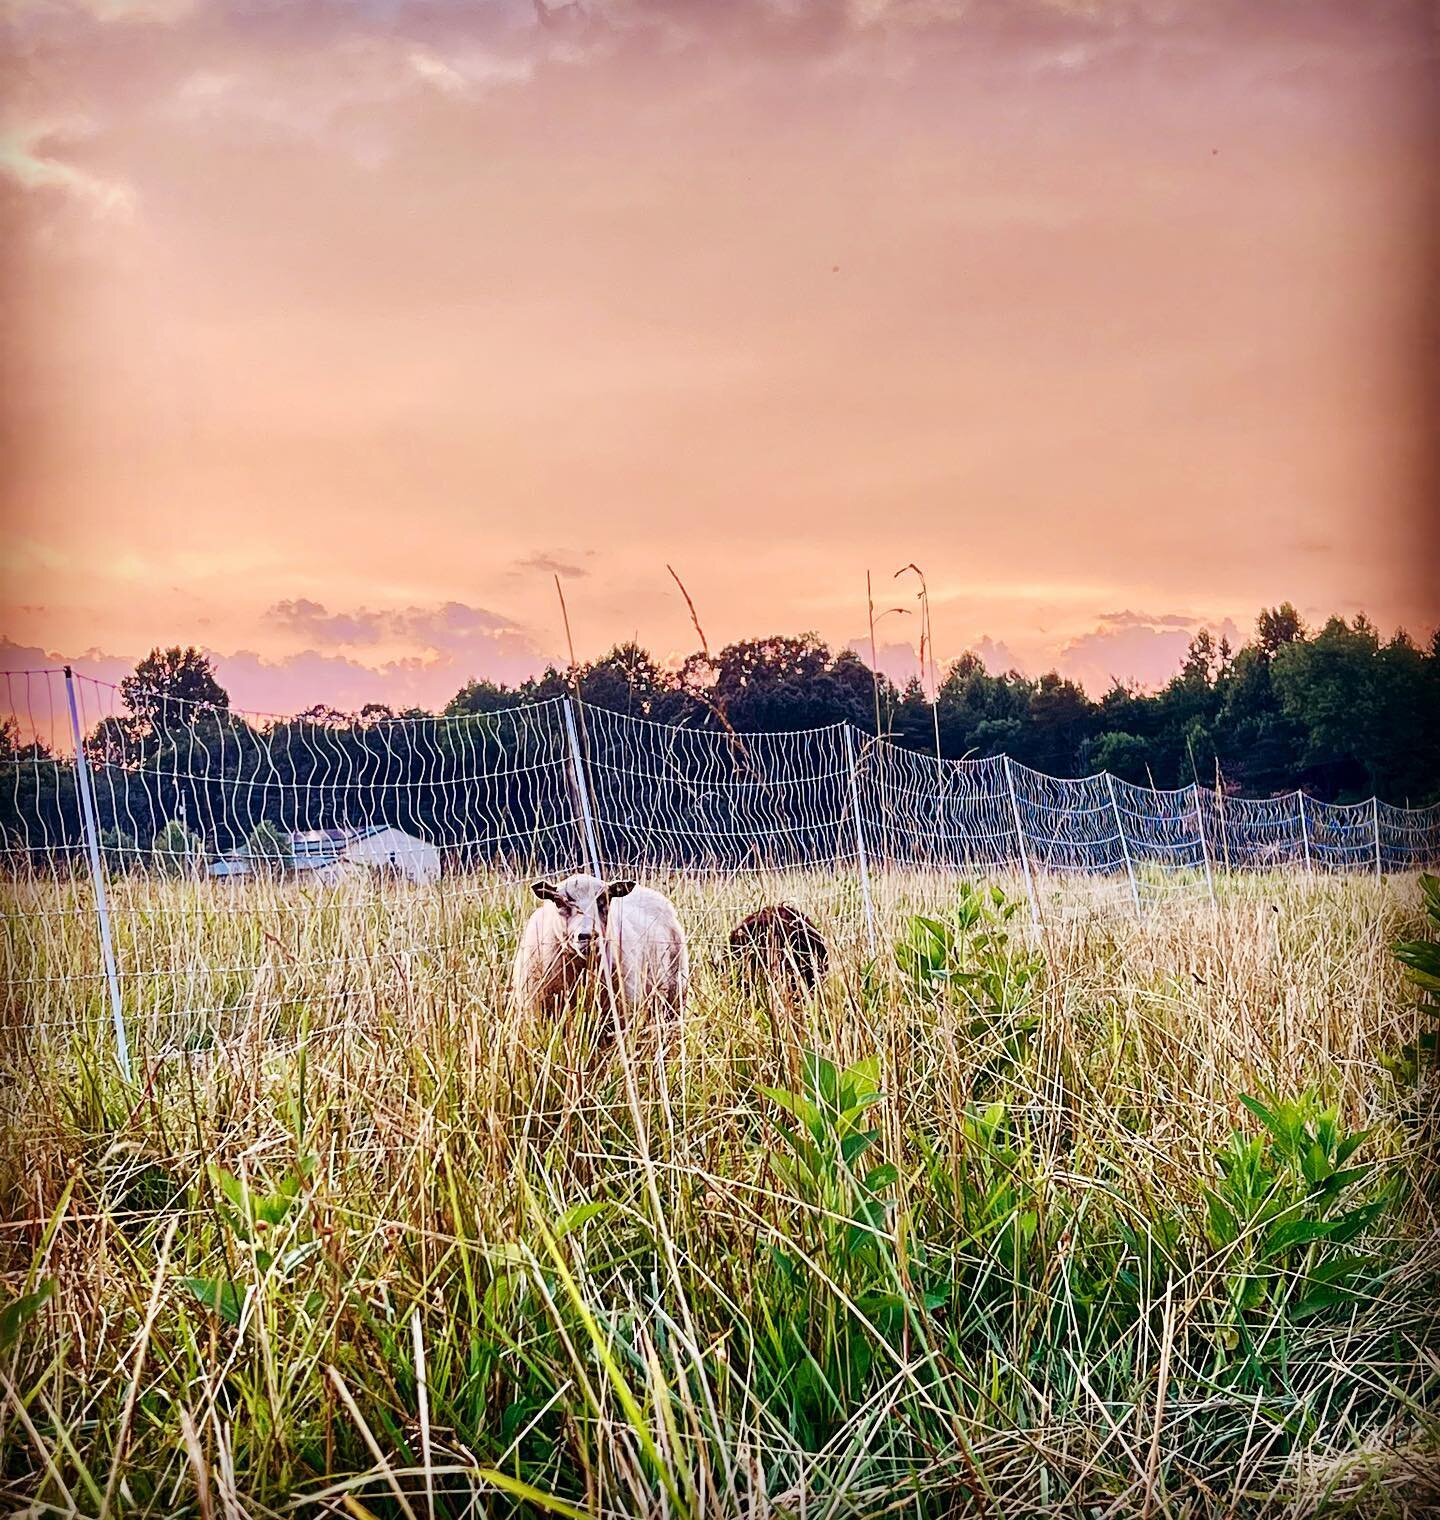 Happiness is sitting in the sheep pasture watching sunset, listening to the birds and bugs and ruminant chewing. Being still. Being thankful for this awesome life.